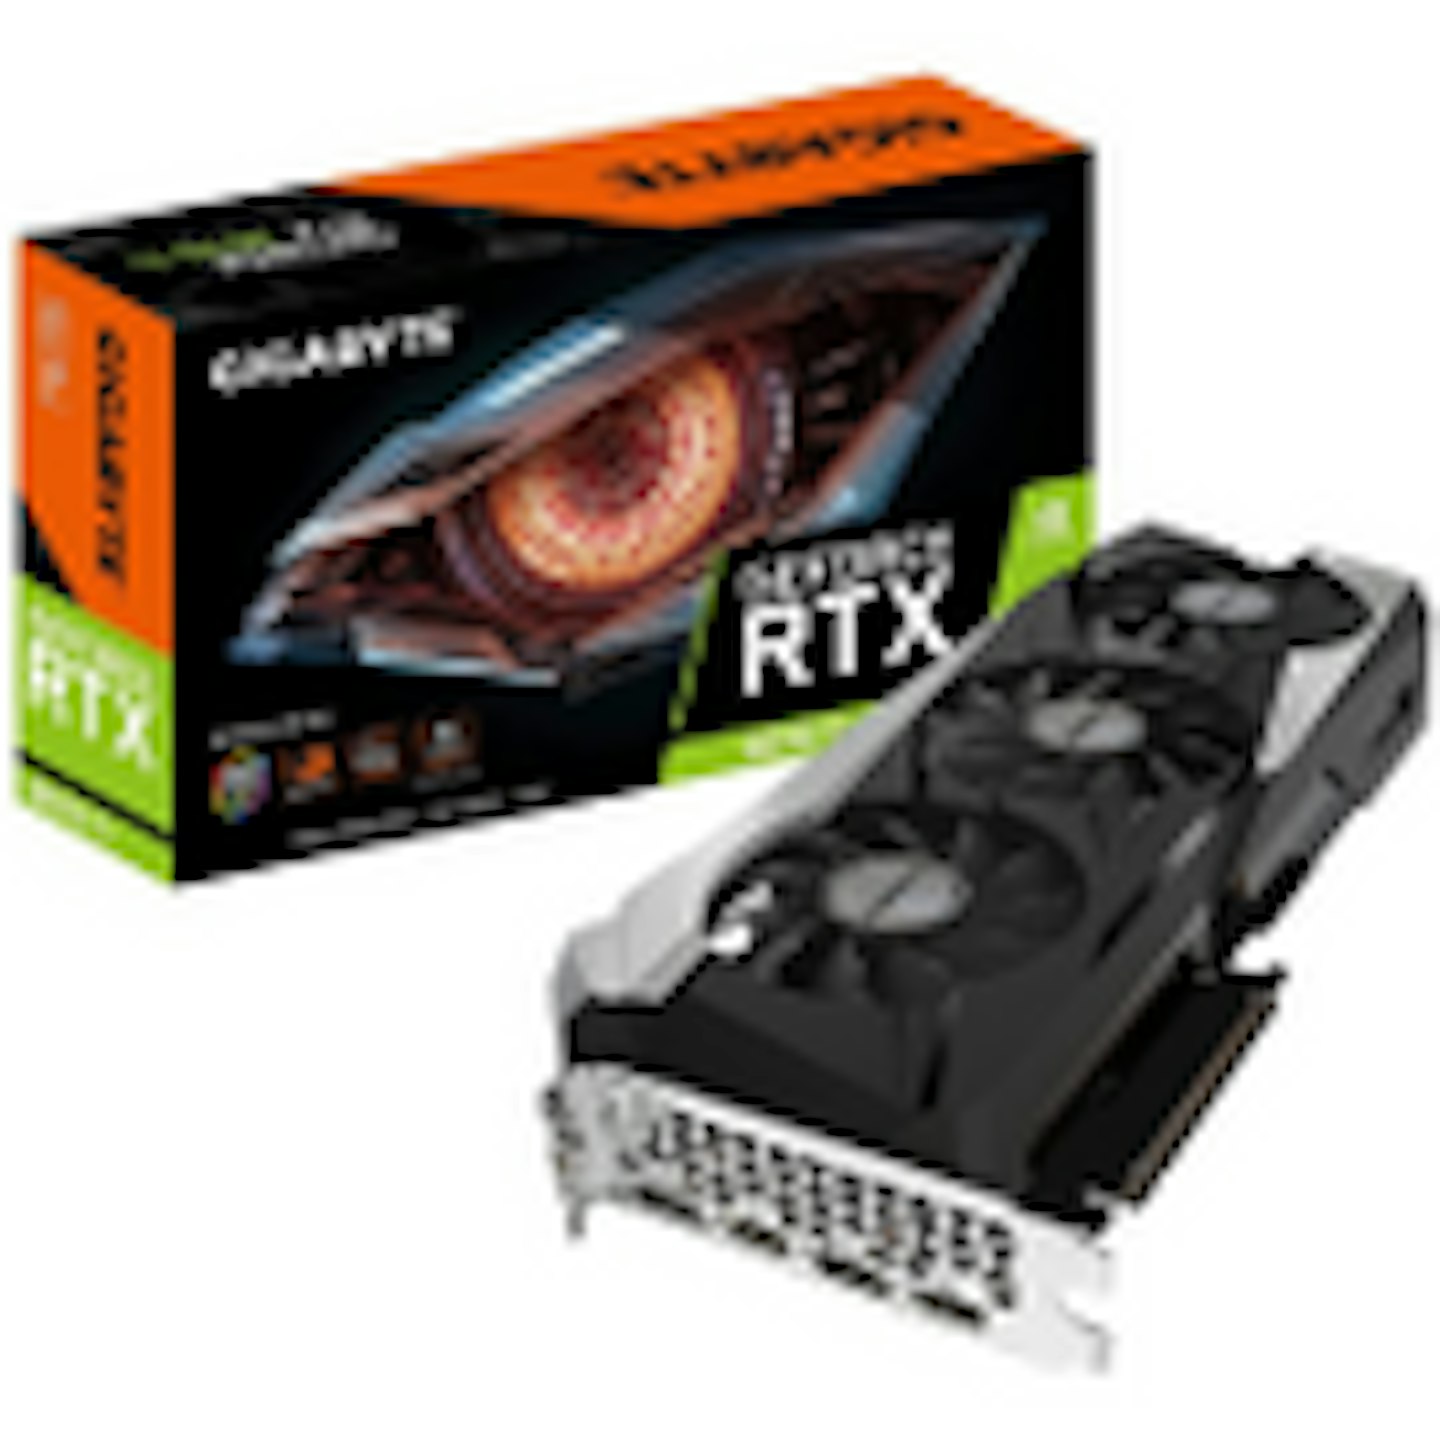 A Gigabyte GeForce RTX 3070 Ti graphics card with box